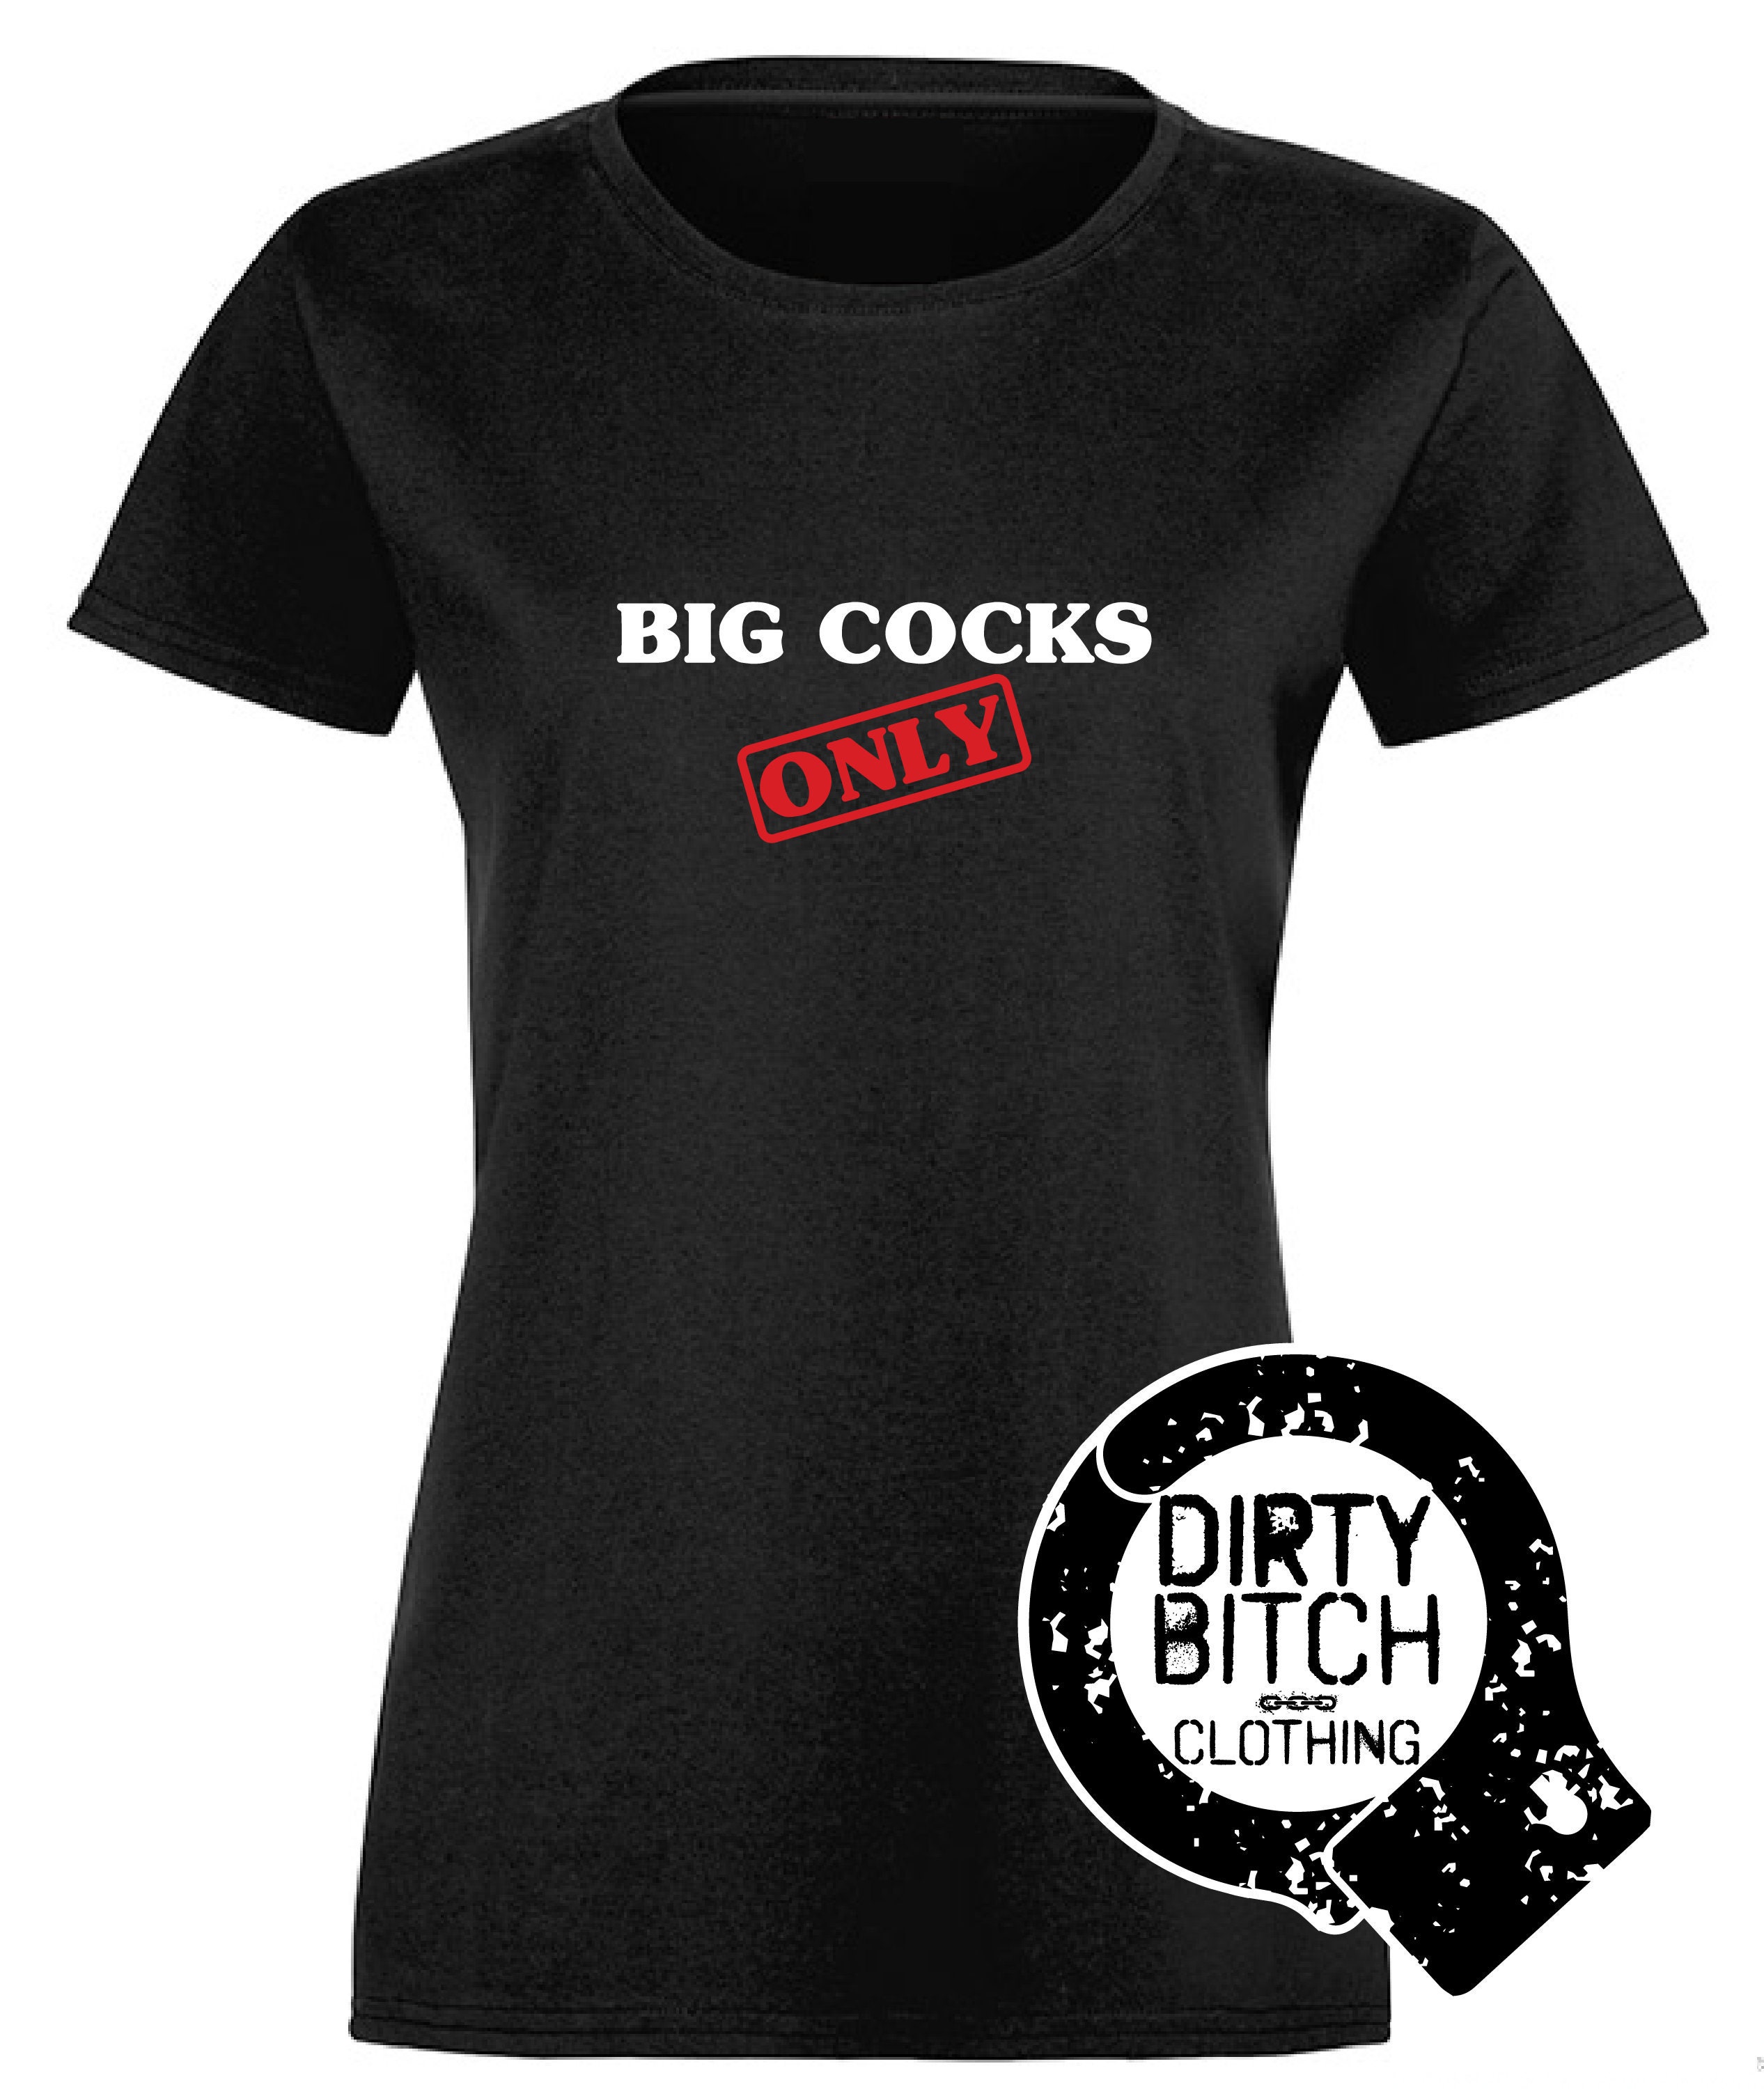 Big Cocks Only Adult T-shirt Clothing Boobs Hotwife pic picture